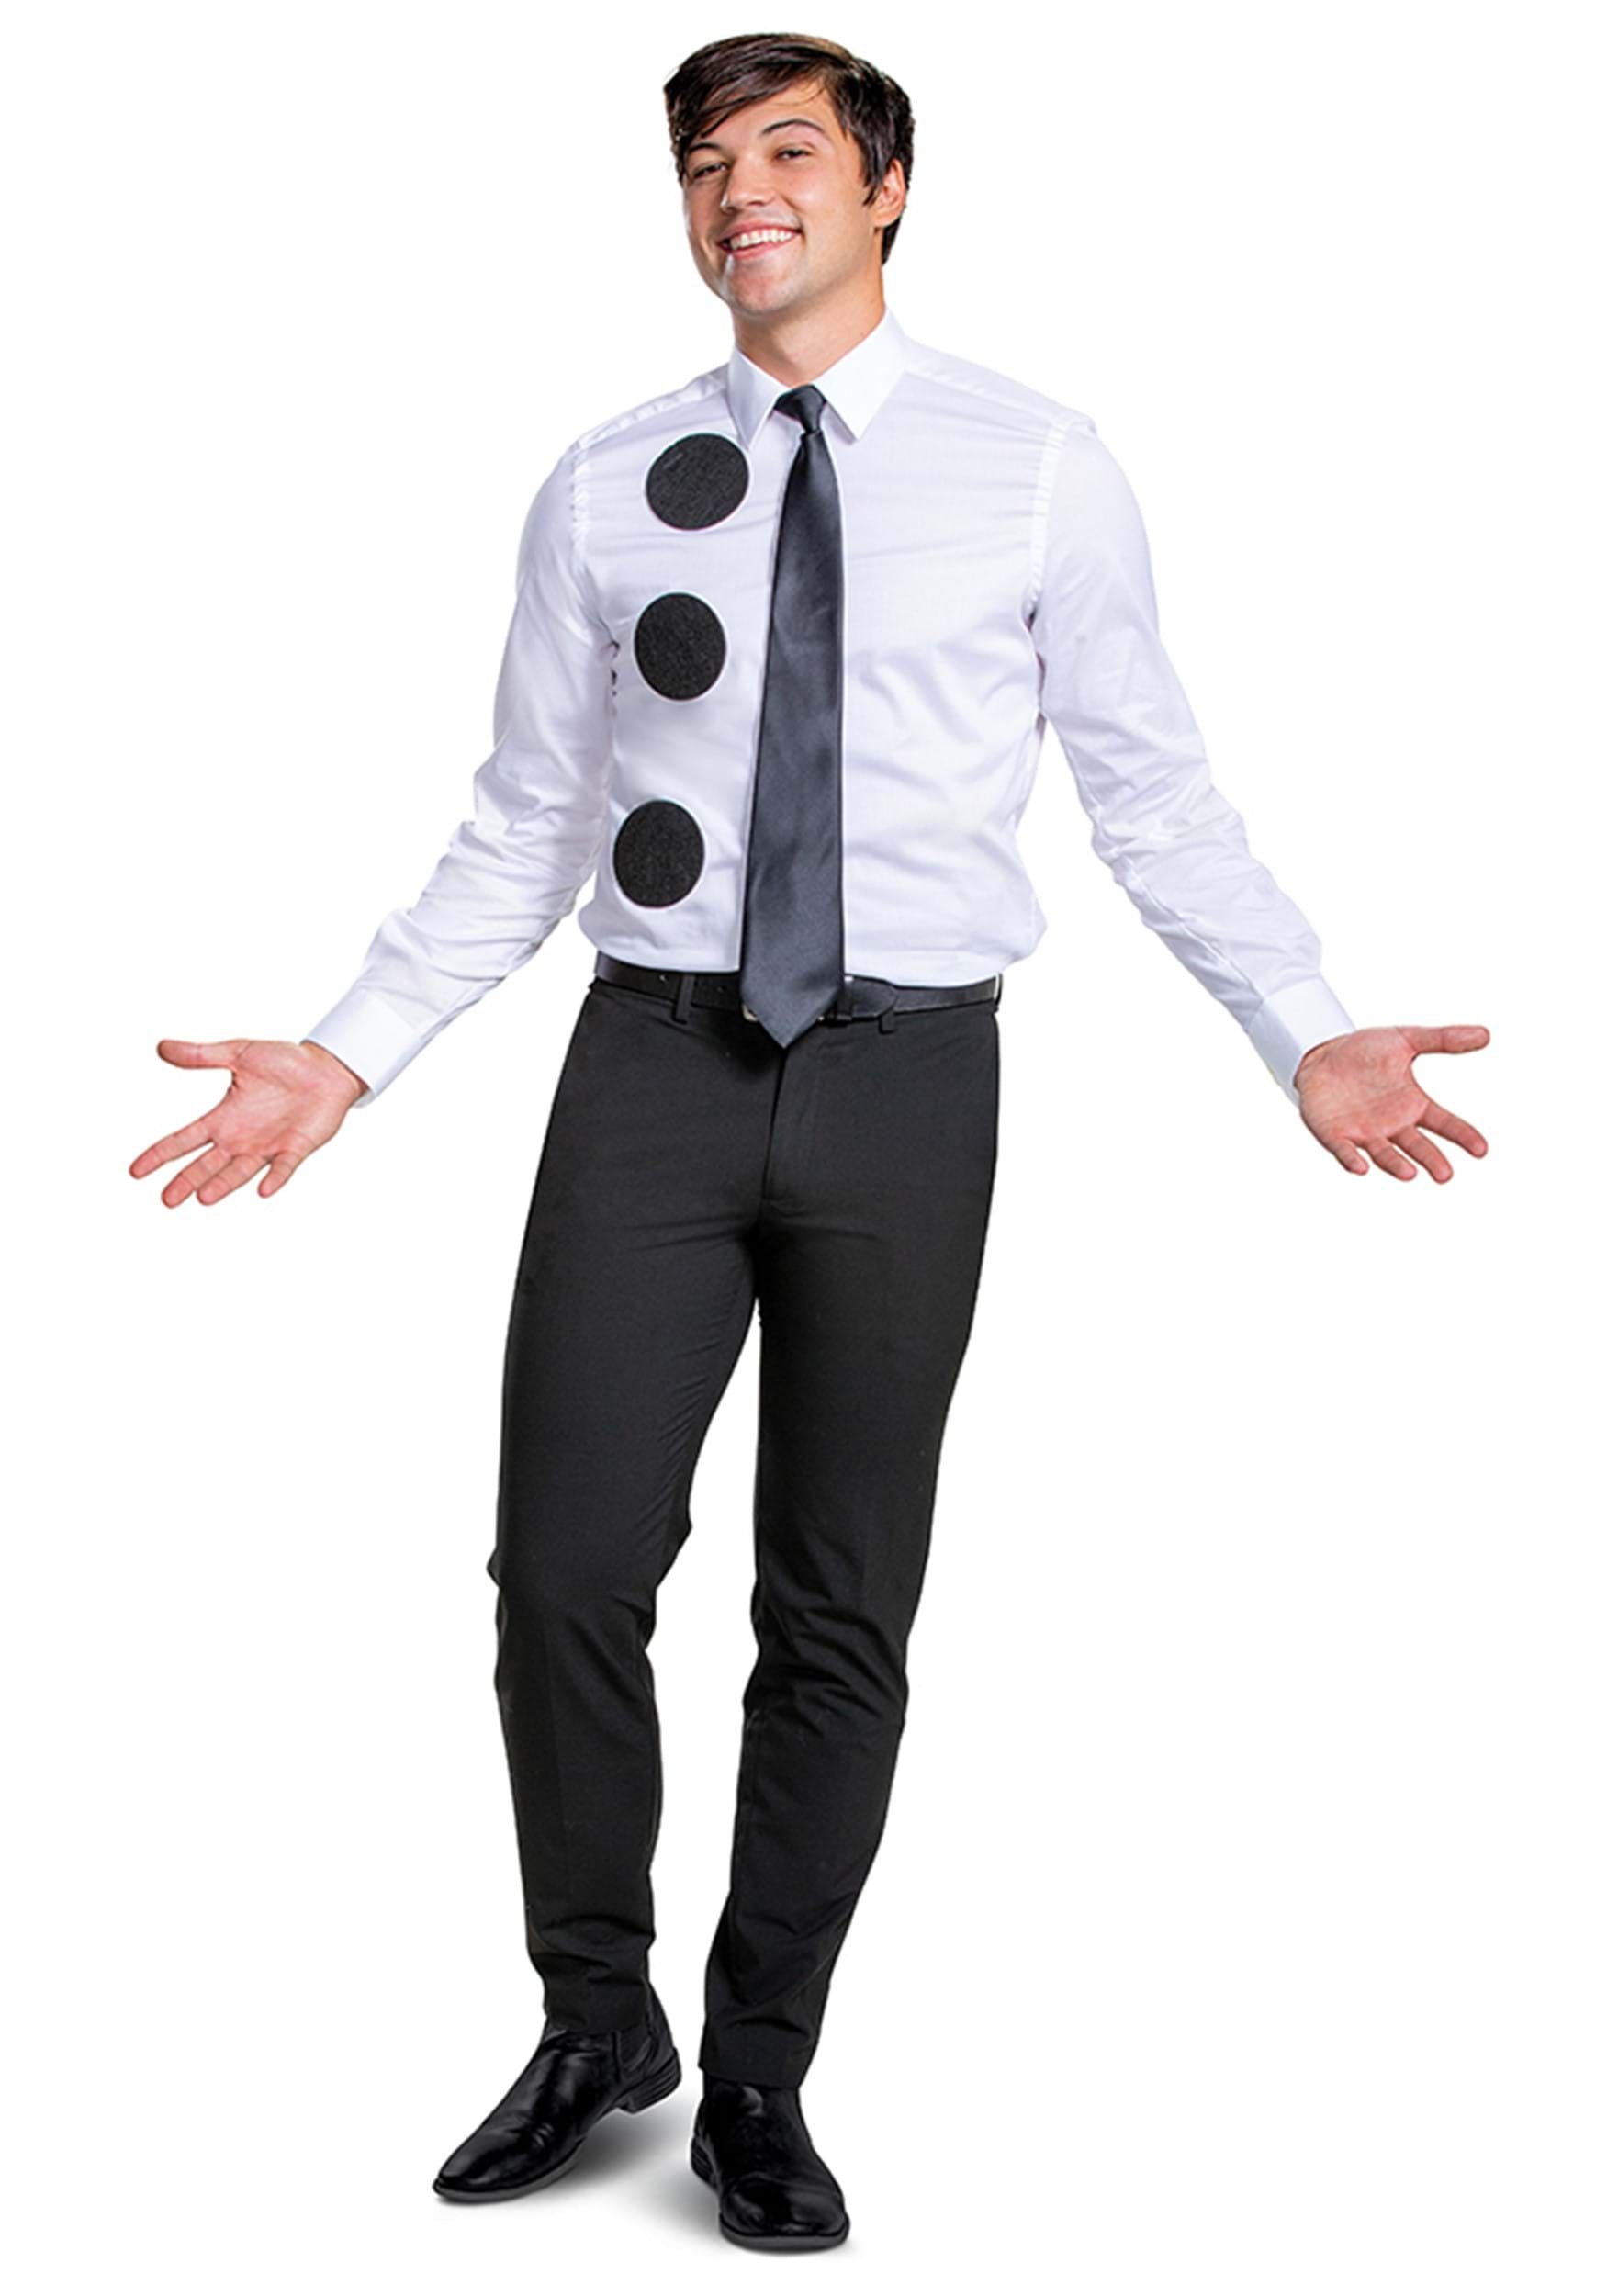 The Office Jim 3-Hole Punch Costume Kit